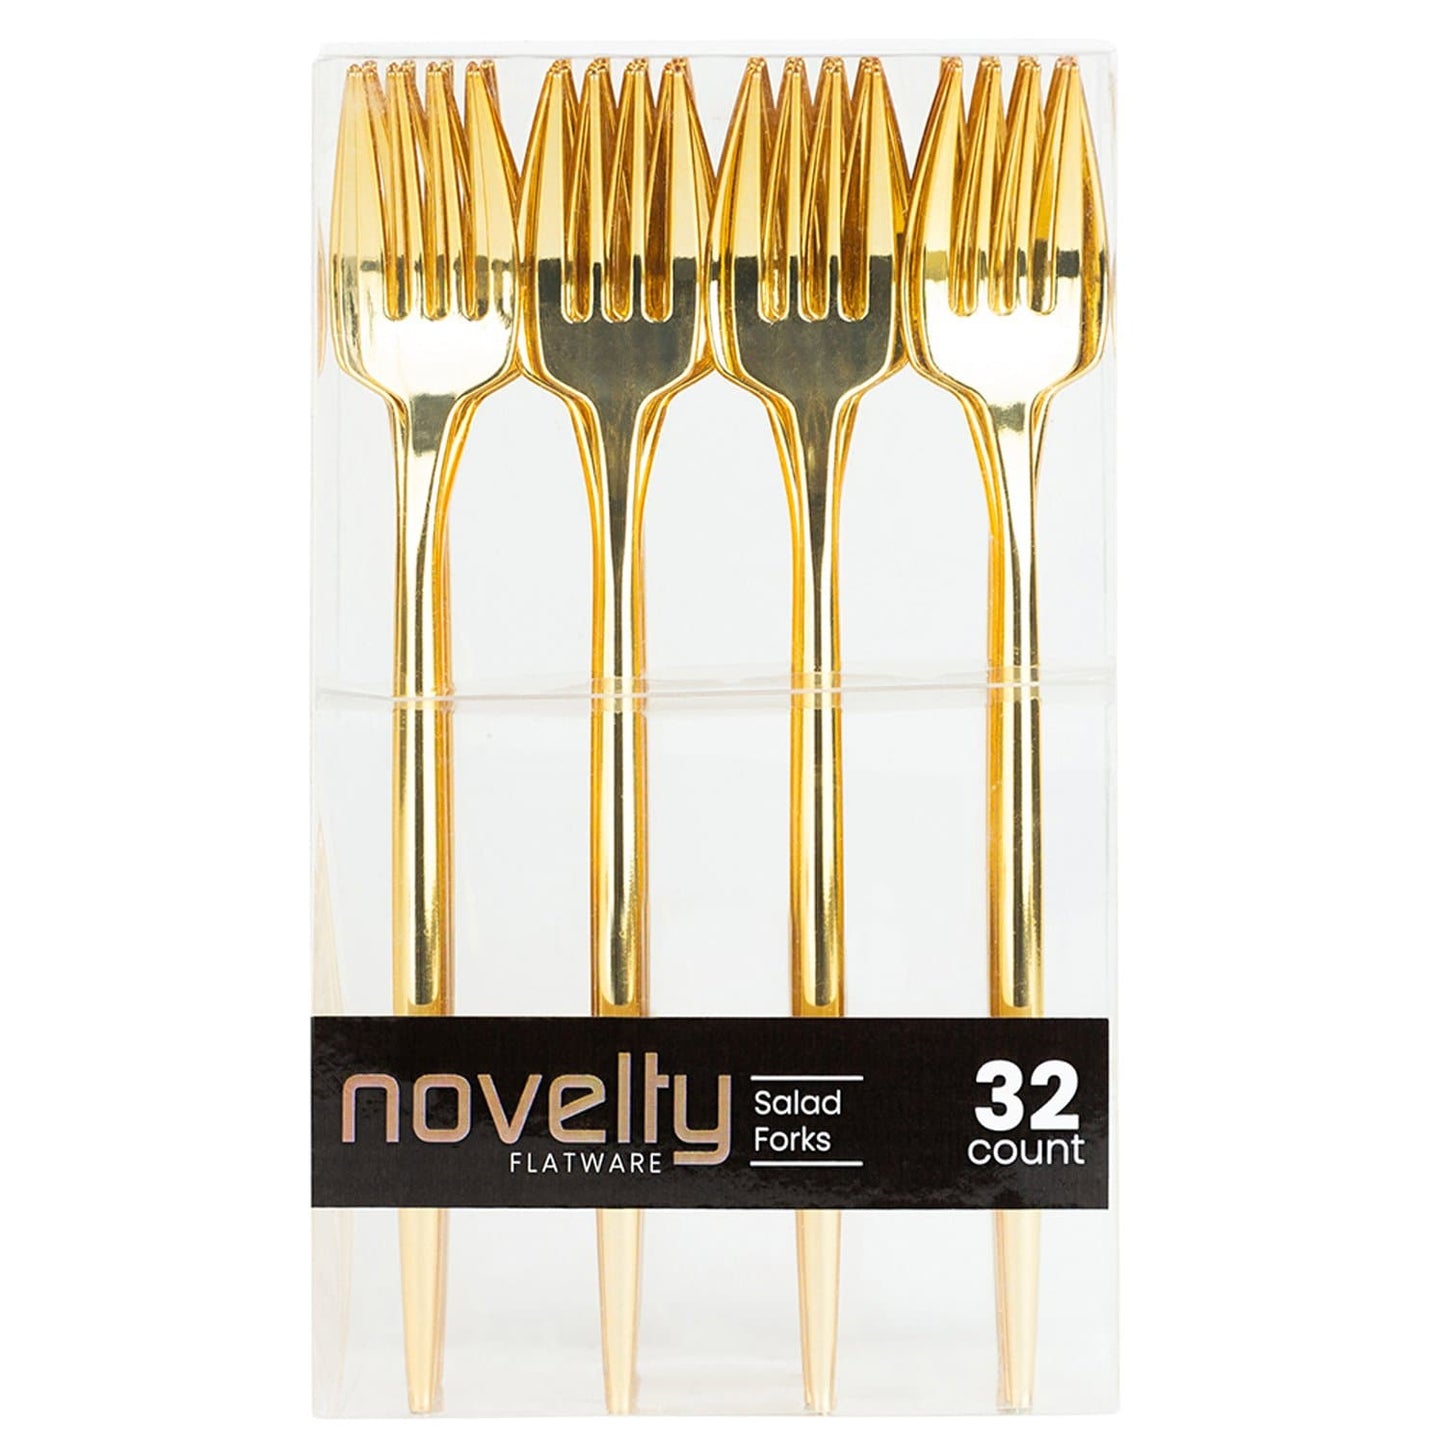 NOVELTY FLATWARE DINNER SALAD FORKS GOLD Tablesettings Blue Sky 32 Pieces  